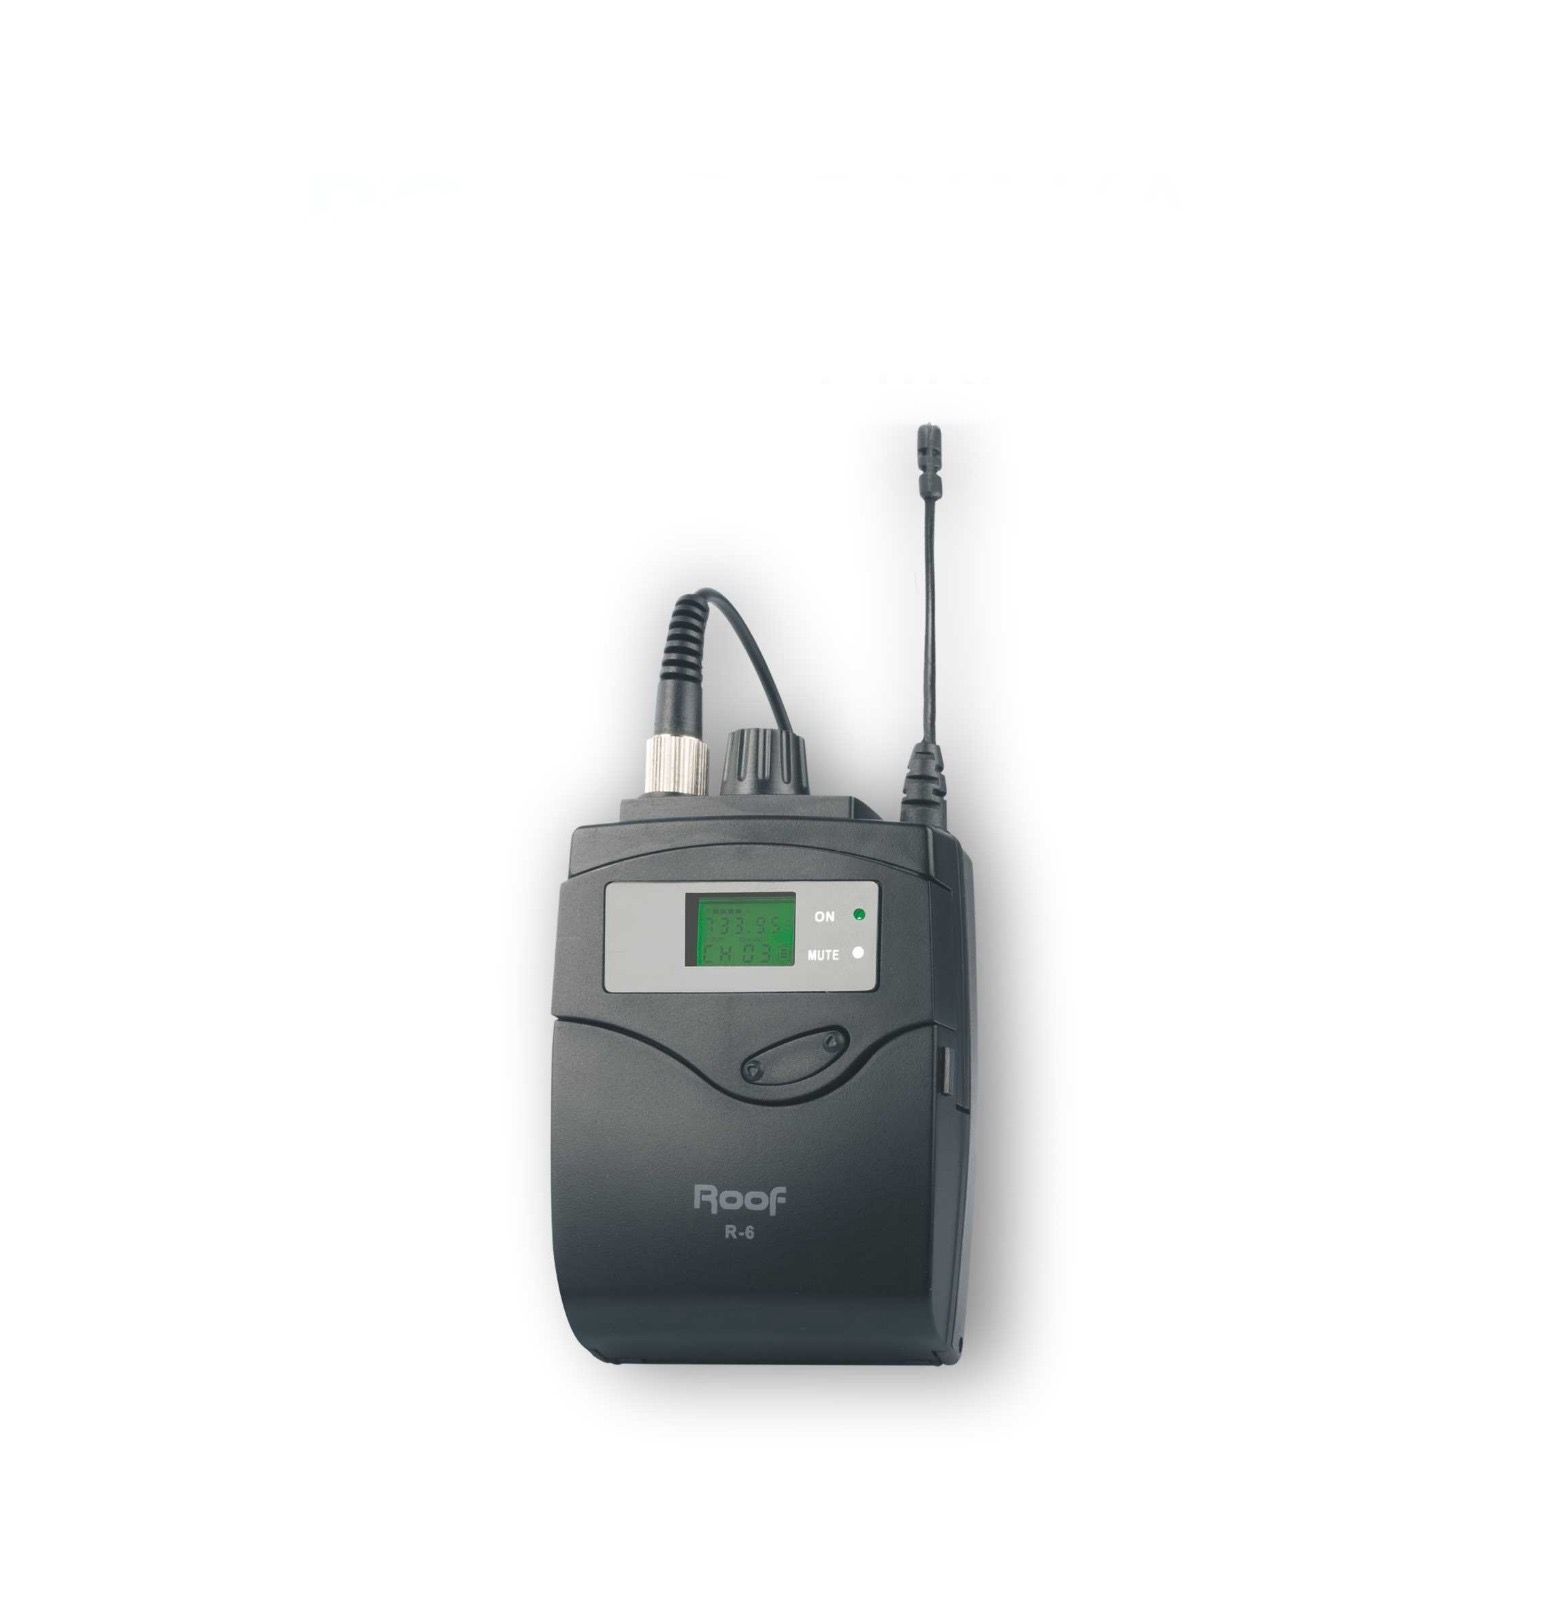 ROOF R-6/A BODYPACK NEW (512-524 mhz)